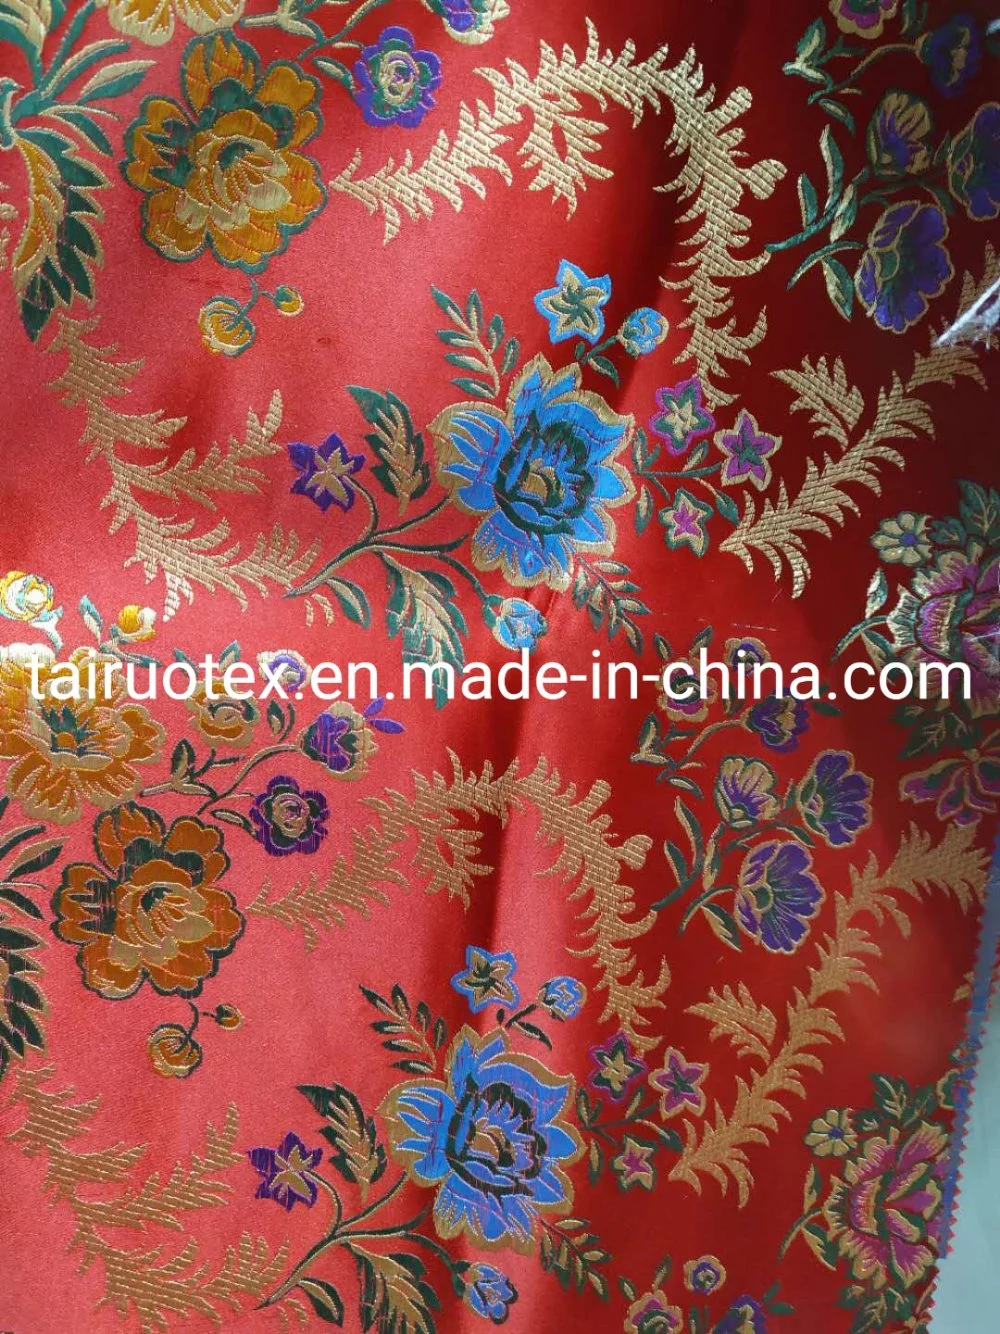 Polyester Jacquard Fabric for Garment Fabric and Bag Lining Fabric